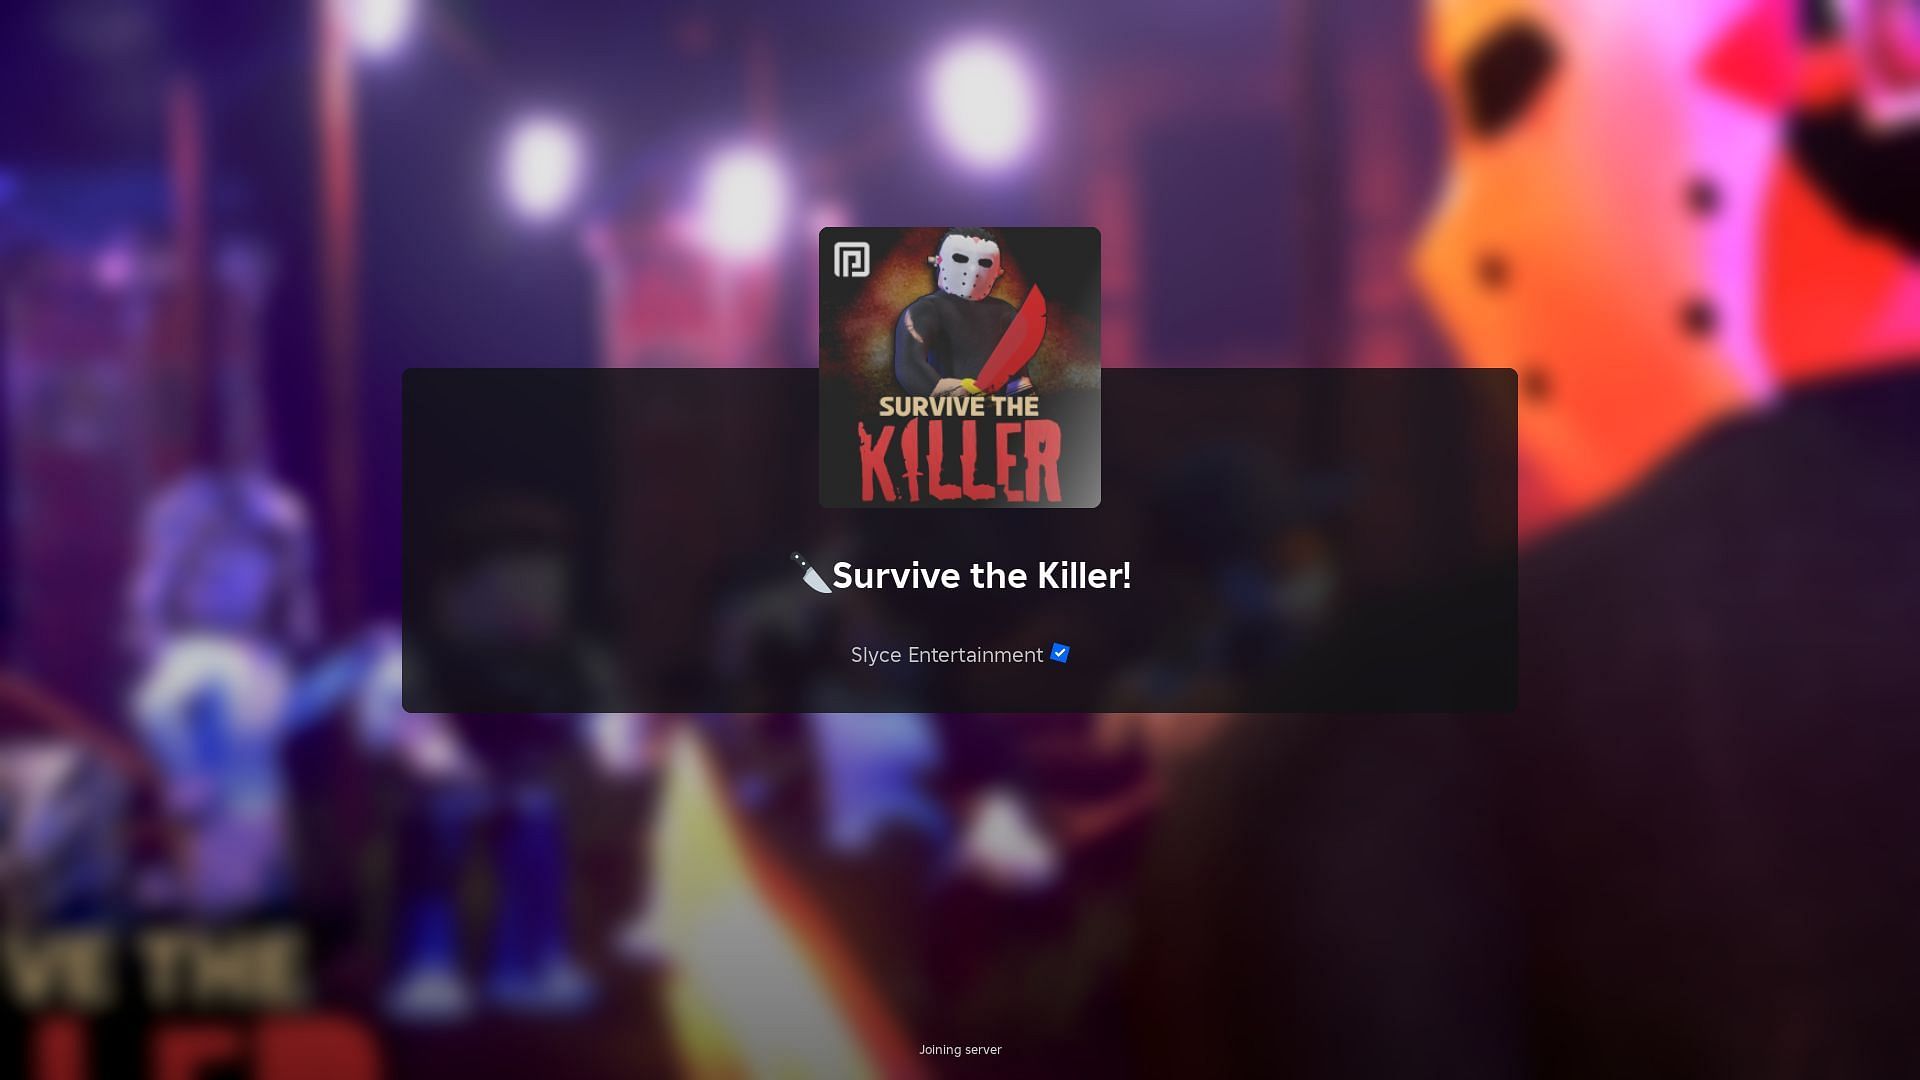 A complete guide to Killers in Survive the Killer